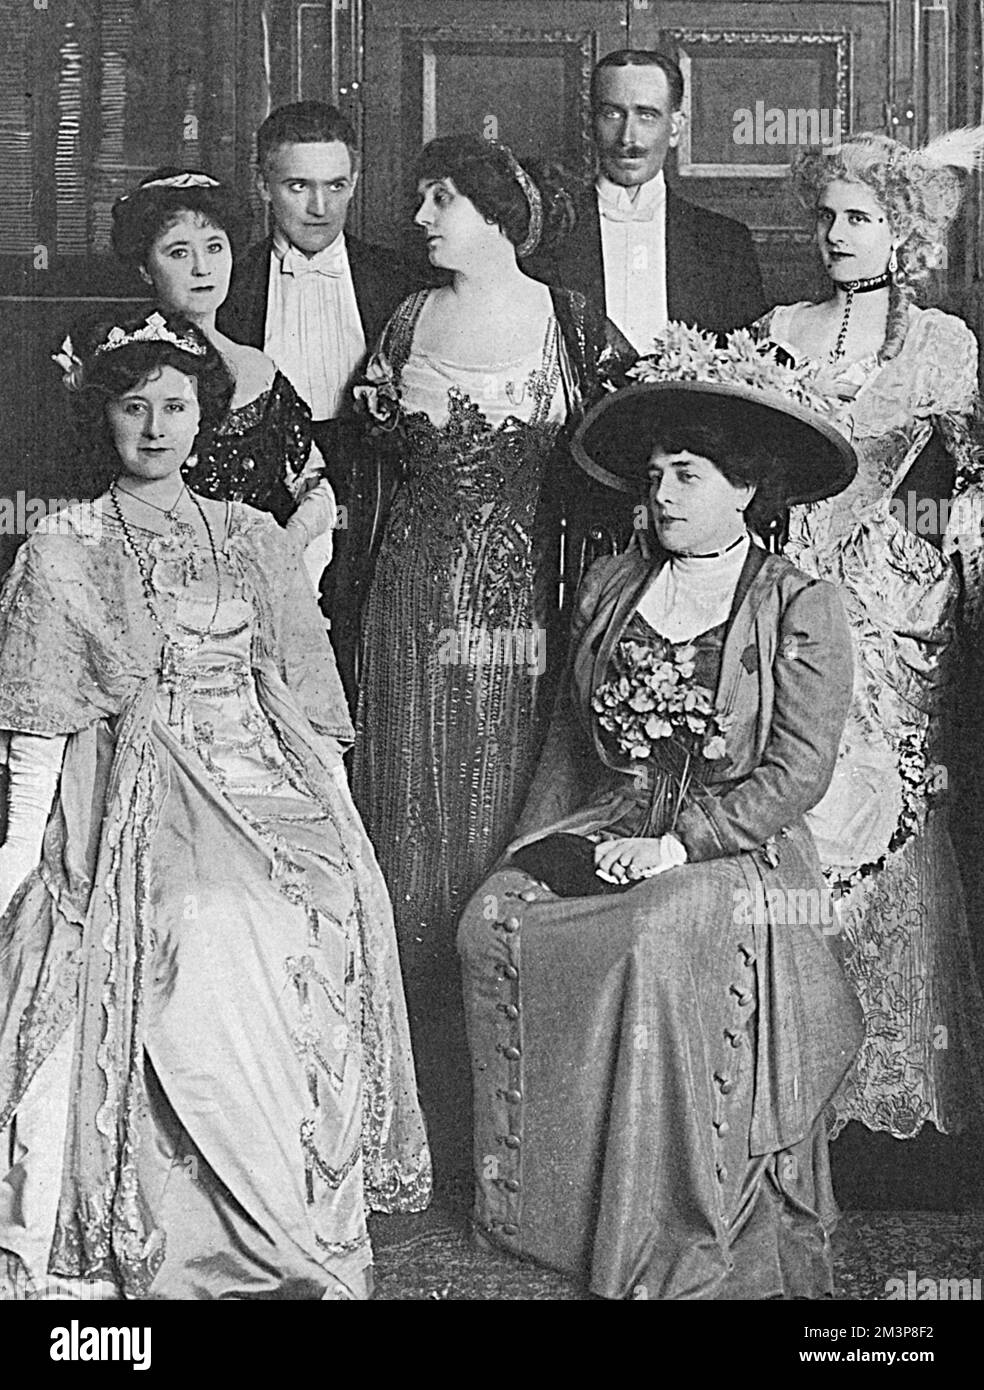 An interesting photograph showing the acclaimed stage beauty, Mrs Patrick Campbell (1865-1940), born Beatrice Stellar Tanner (pictured centre), in the same photograph as Mrs George Cornwallis-West (Lady Randolph Churchill, formerly Jennie Jerome, mother of Winston Churchill).  Lady Randolph married George Cornwallis-West, a man twenty years her junior, in 1900.  George began an affair with 'Mrs Pat' around 1909 and he and Jennie separated in 1912.  She reverted to her old title of Lady Randolph Churchill and later married Montagu Porch.  Picture shows the cast of 'His Borrowed Plumes,' a comed Stock Photo